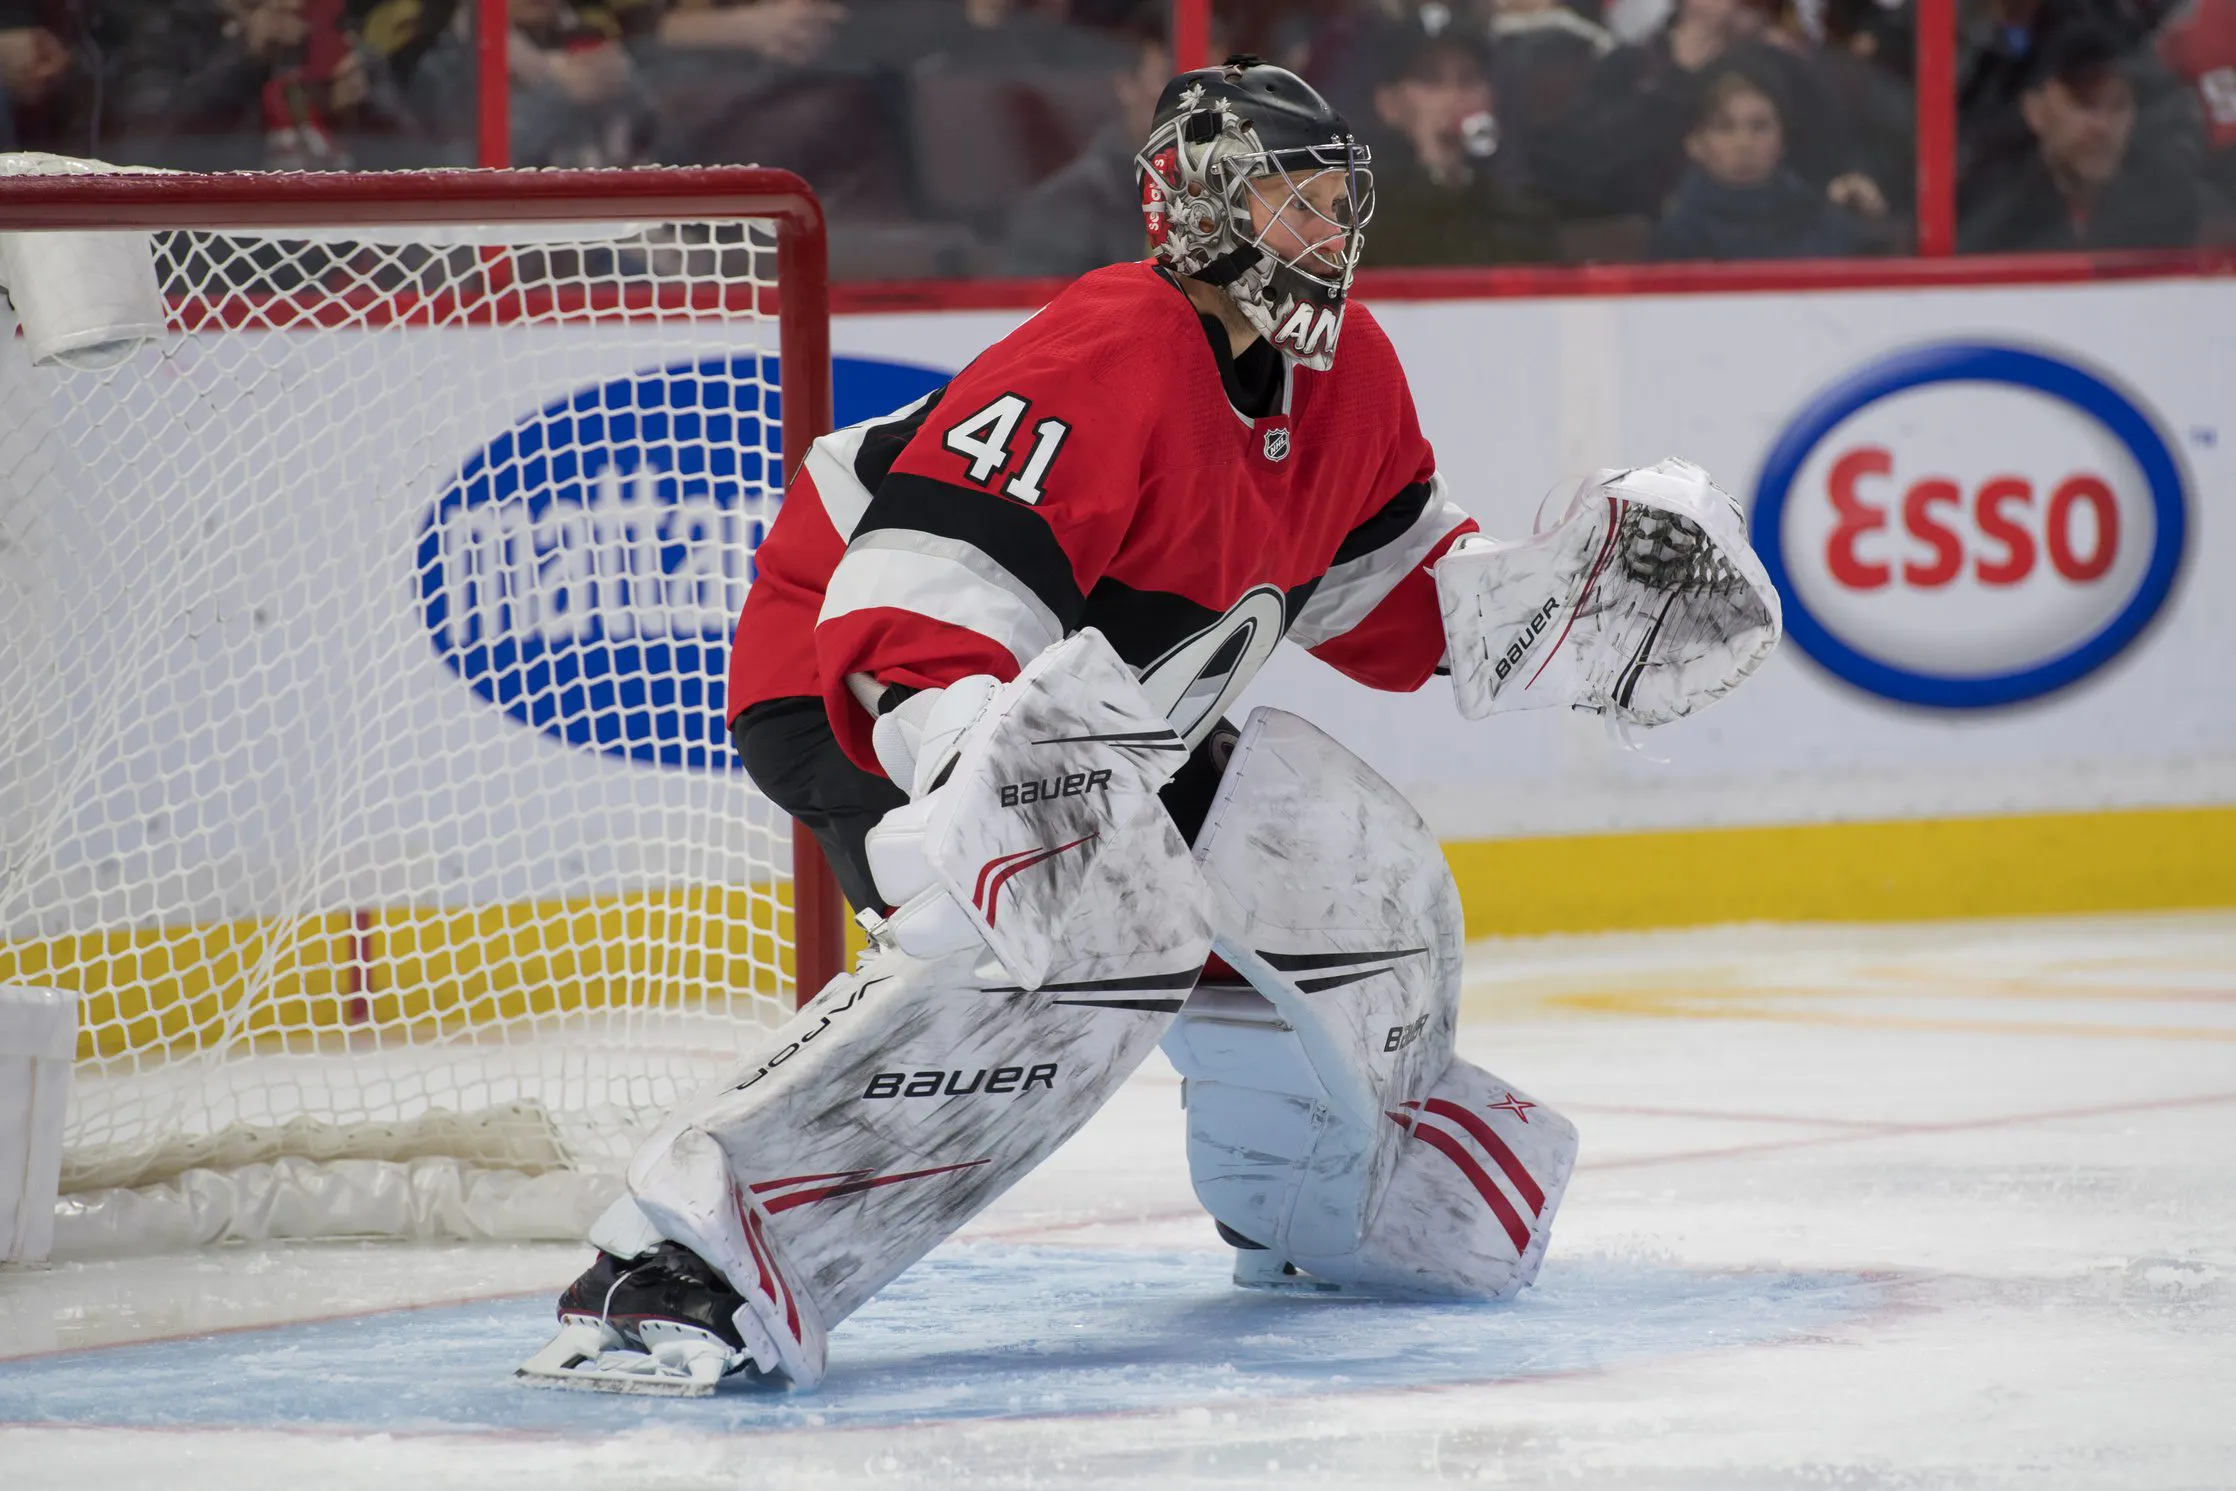 Senators sign Craig Anderson to one-day retirement contract; will join Sabres as hockey liaison